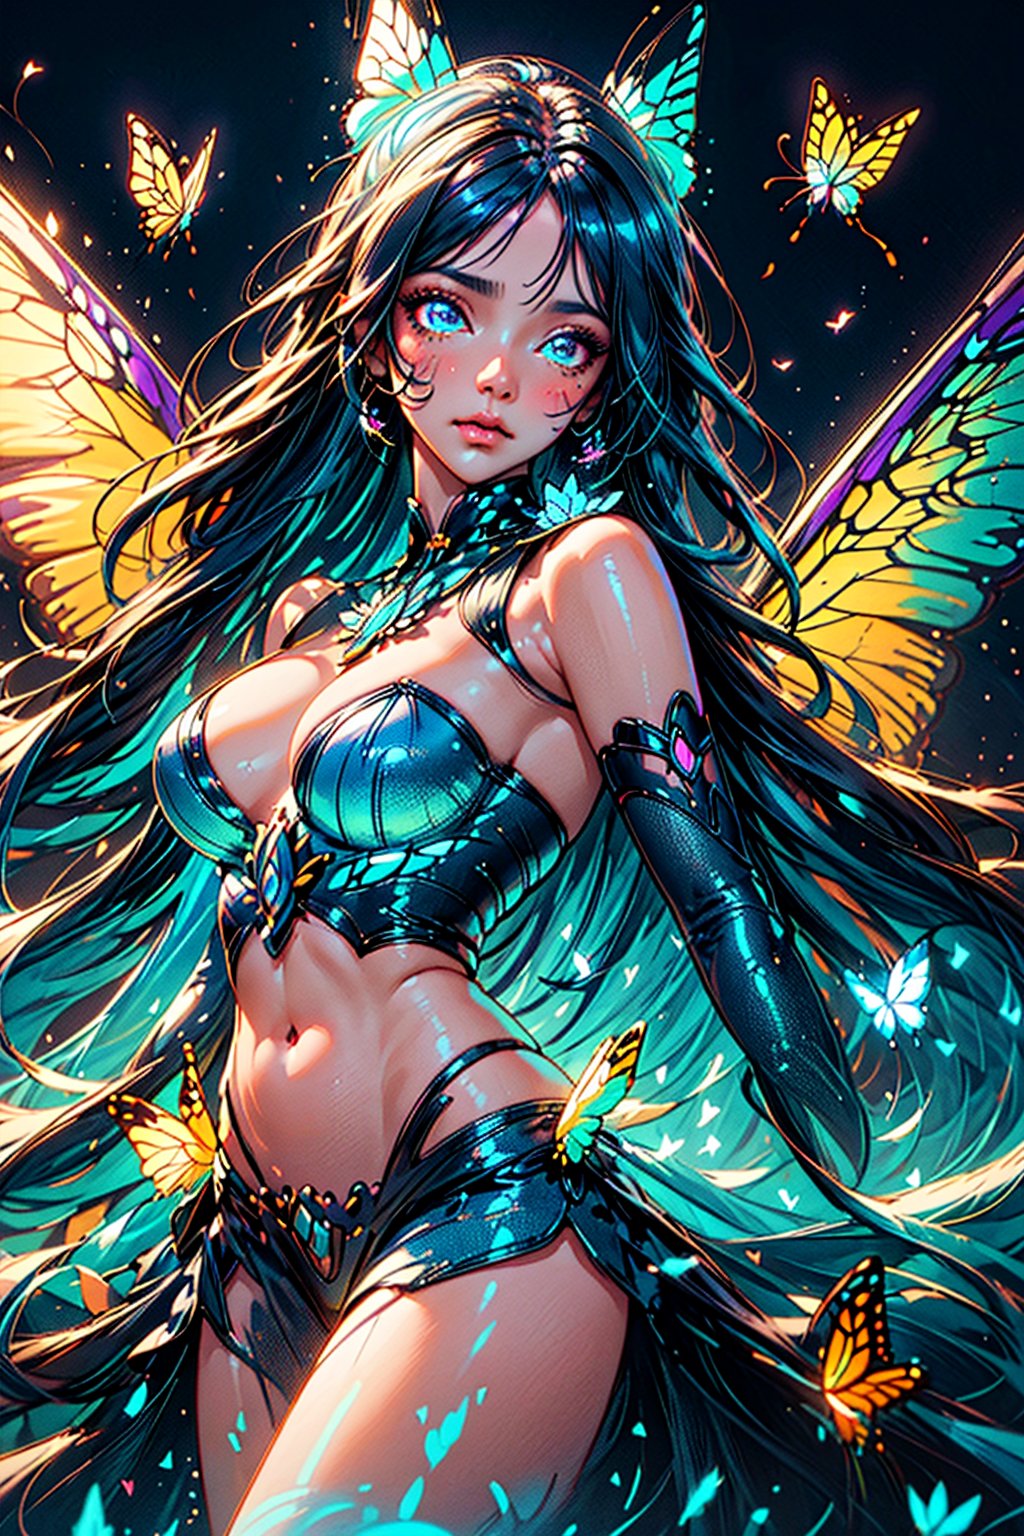 masterpiece, 1 girl, Extremely beautiful woman standing in a glowing lake with very large glowing blue butterfly wings, glowing hair, long cascading hair, neon hair, ornate butterfly dress, midnight, lots of glowing butterflies flying around, full lips, hyperdetailed face, detailed eyes, belly_dancer